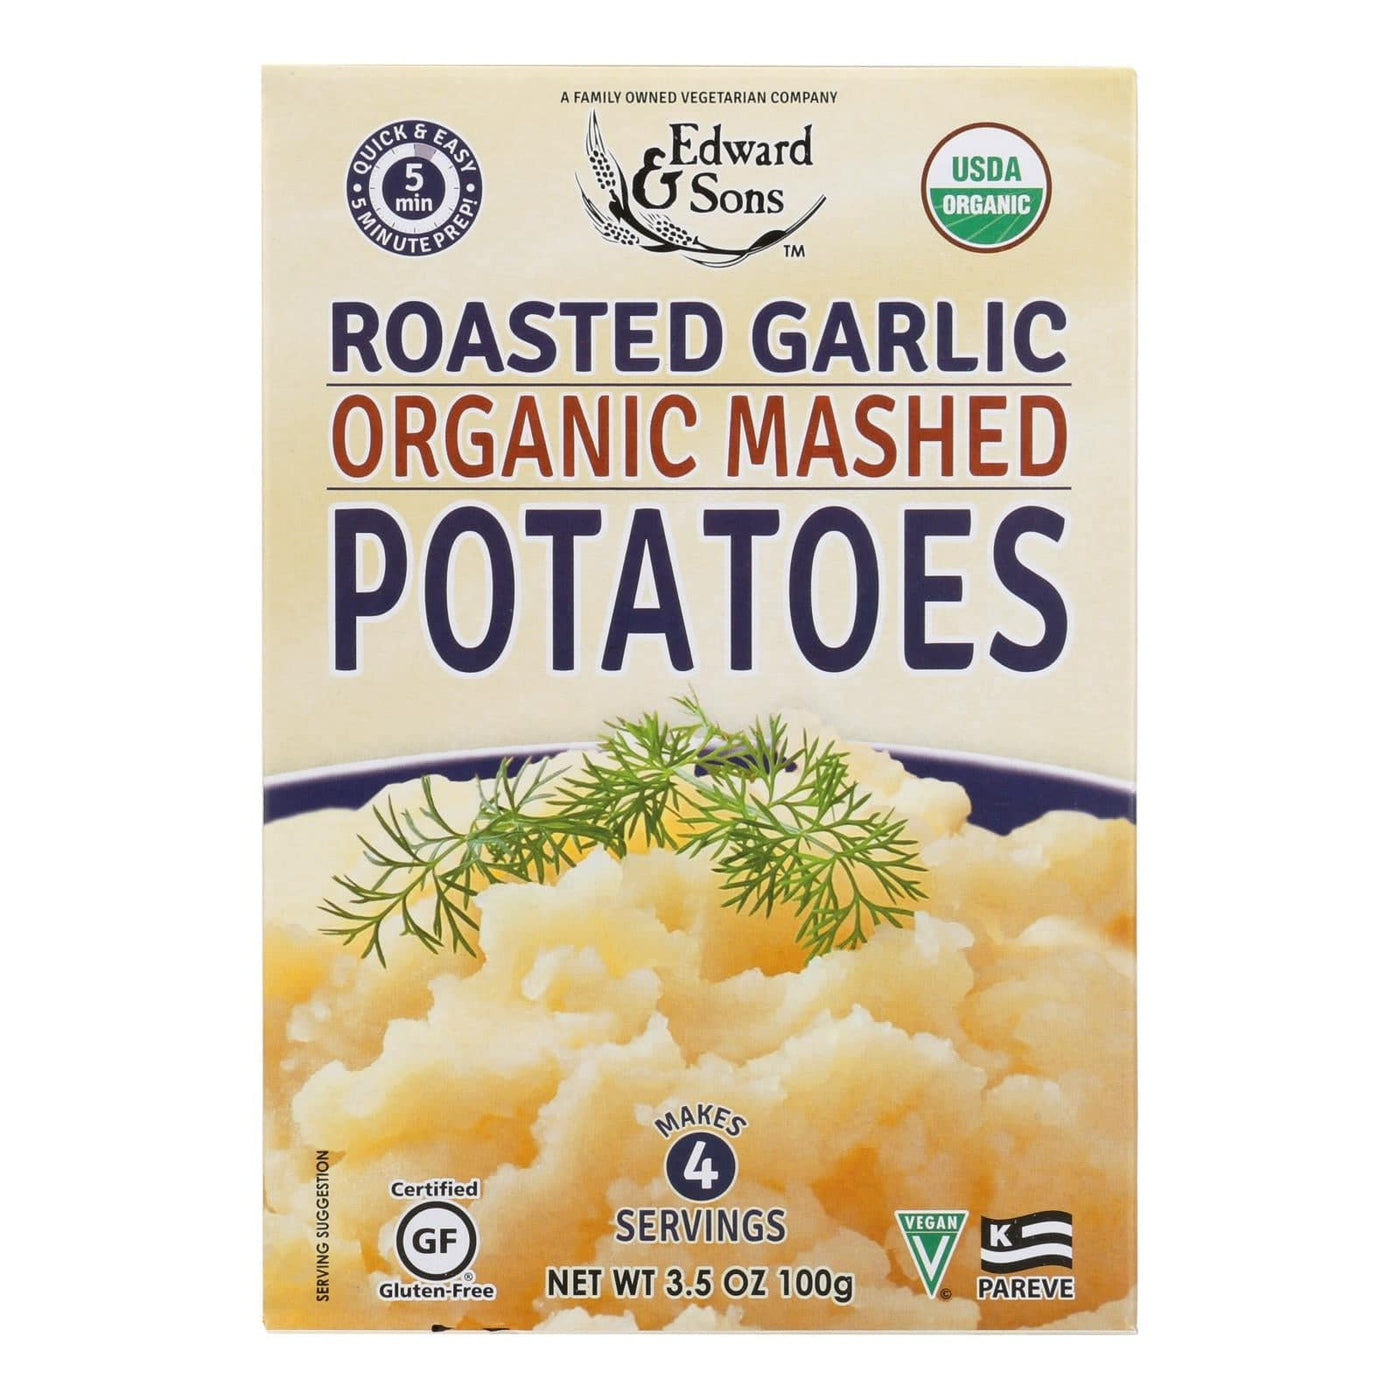 Edward And Sons Organic Mashed Potatoes - Roasted Garlic - Case Of 6 - 3.5 Oz. | OnlyNaturals.us